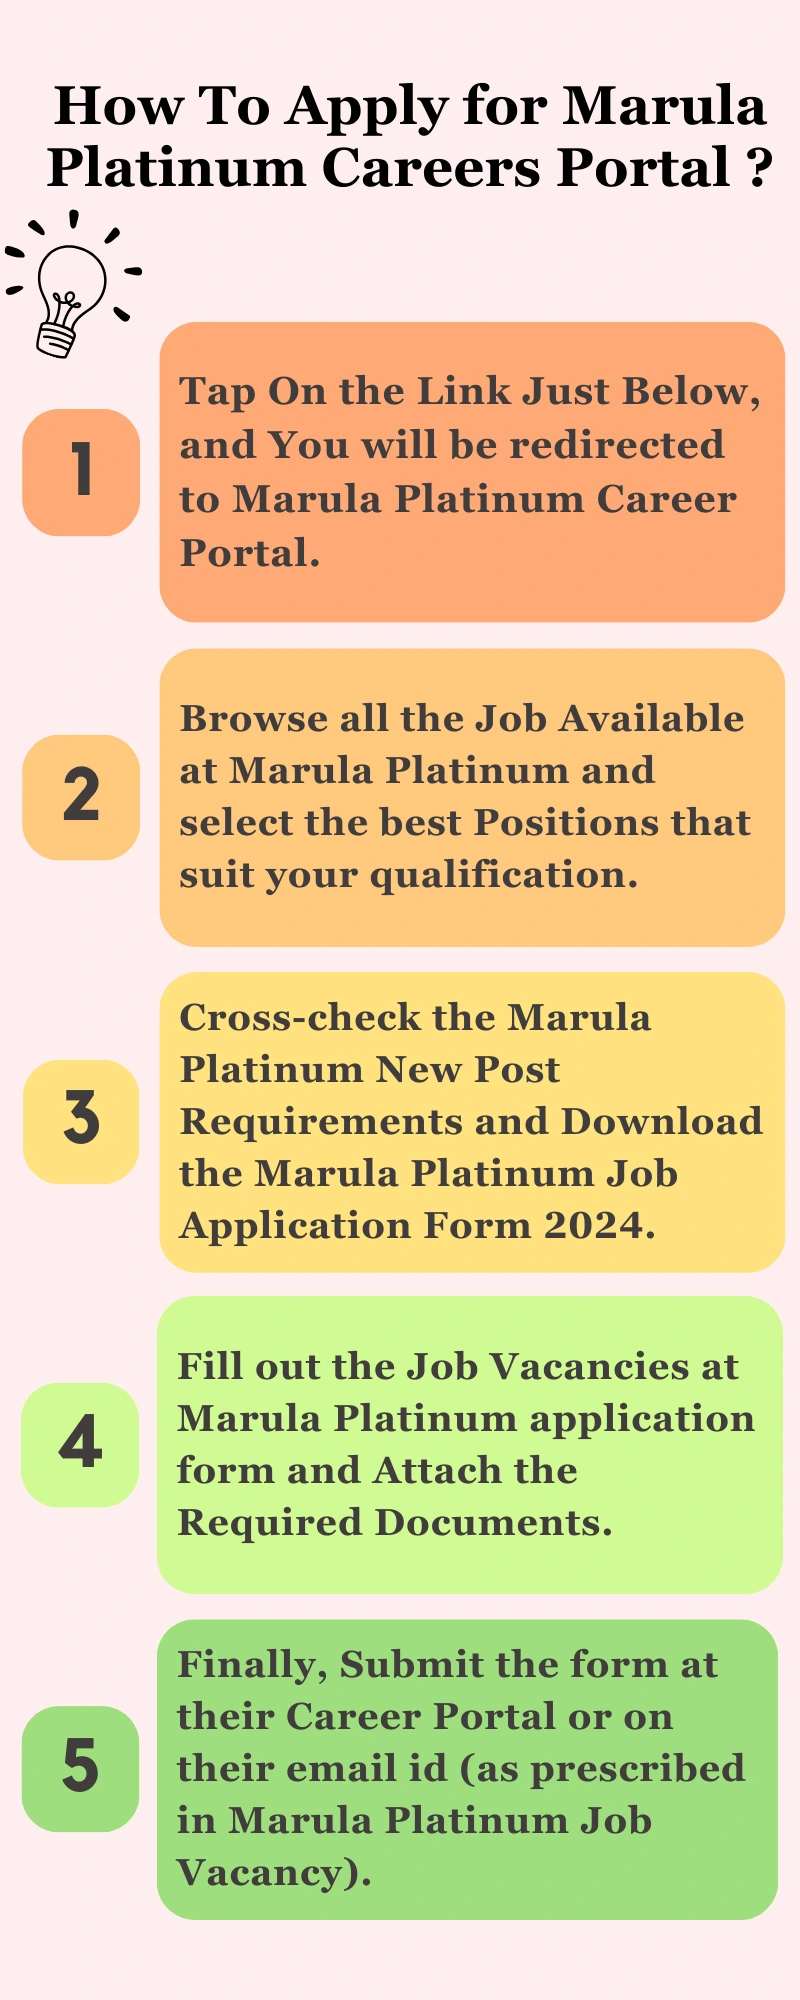 How To Apply for Marula Platinum Careers Portal ?